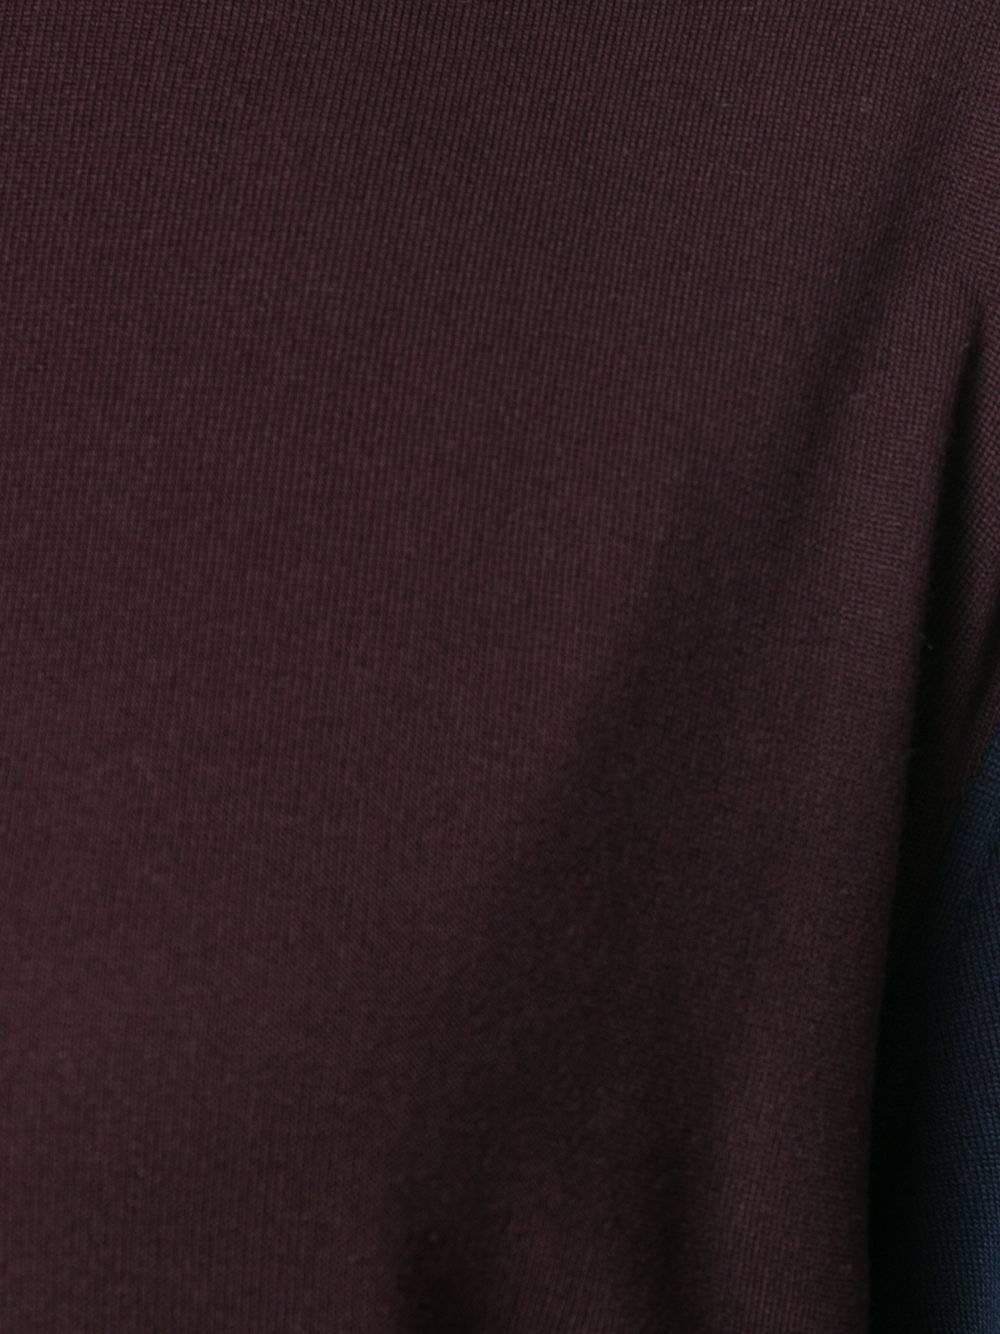 This Hermes turtleneck top is crafted from brown, black and blue silk. Featuring long sleeves, a ribbed hem and cuffs, and finished with a straight hem. 

Colour: Black/ Brown/ Blue

Composition: 100% Silk

Size: L

Condition: 9/10